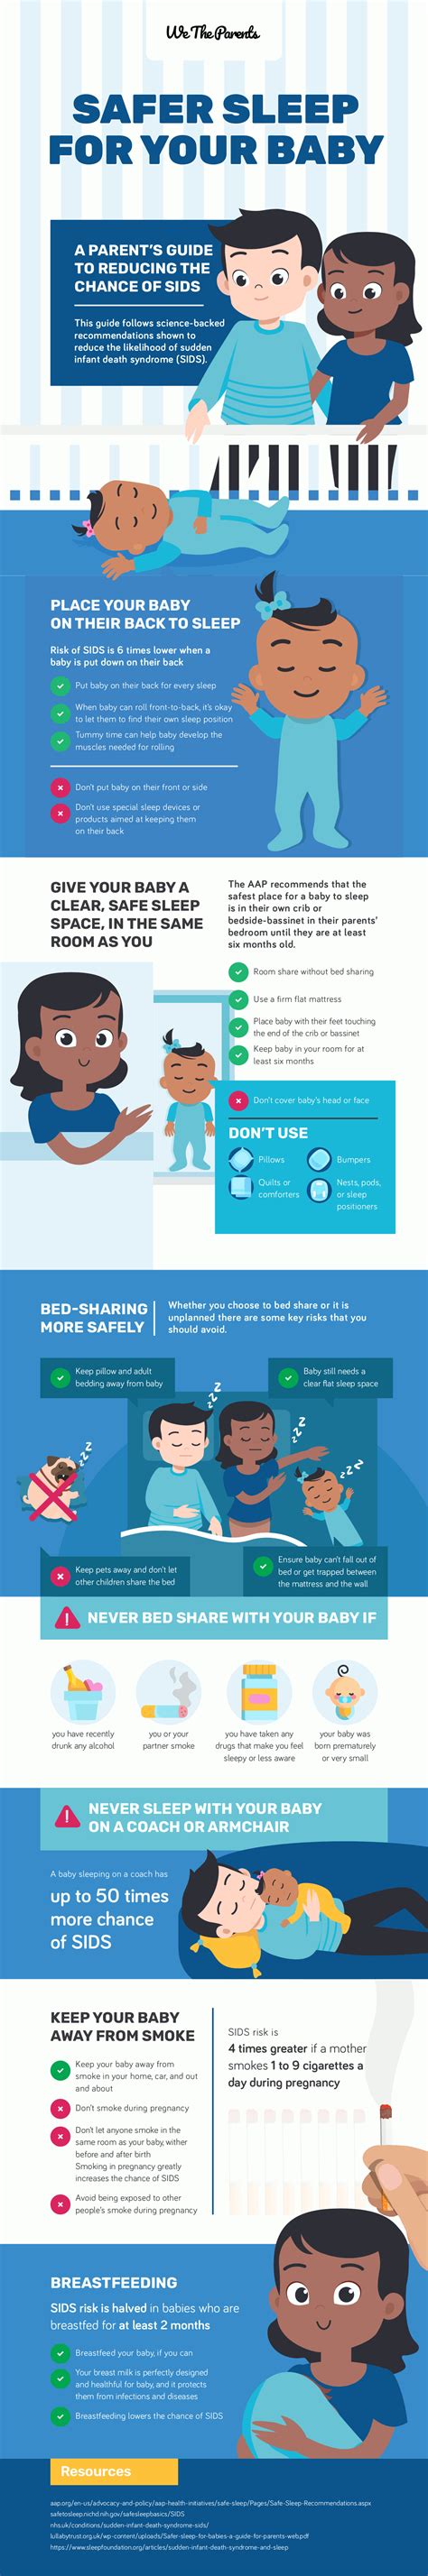 4 Safety Strategies for SIDS Prevention